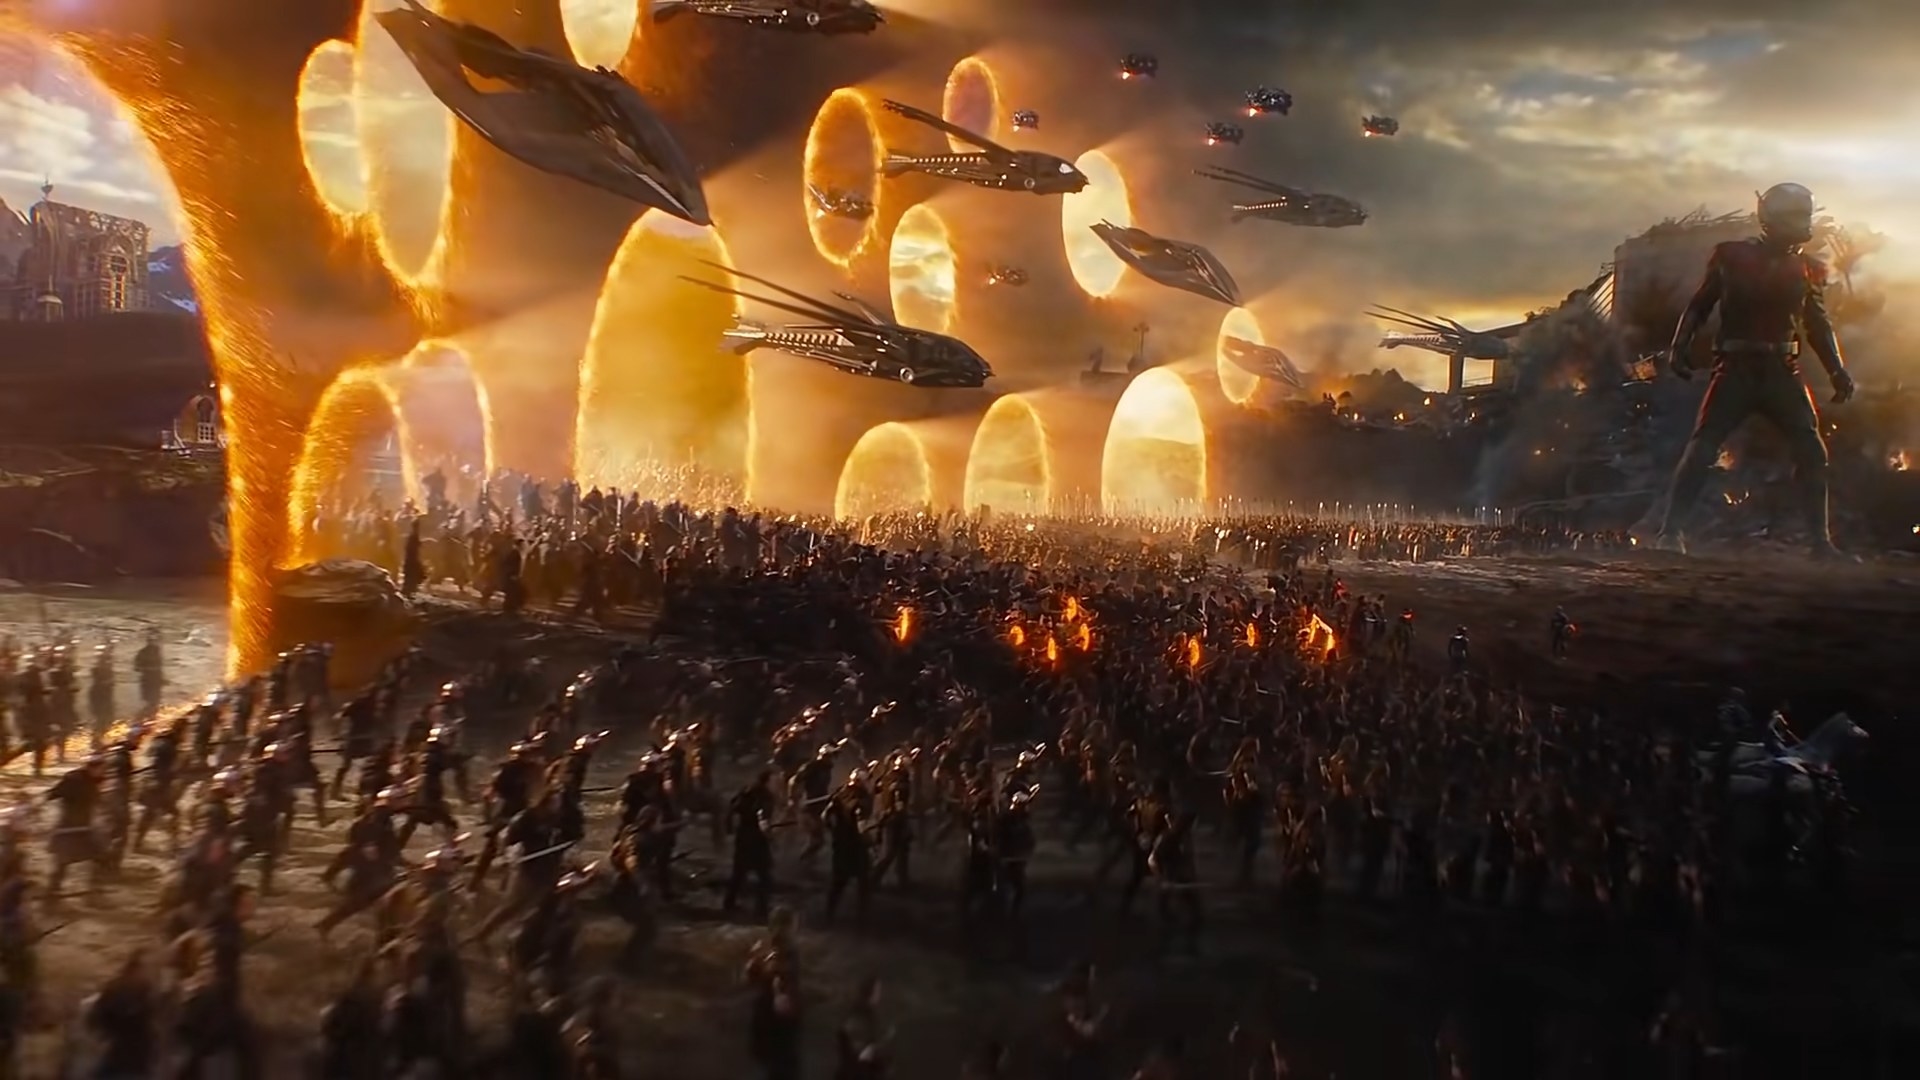 The Avengers&#x27; army gathering through portals in &quot;Avengers: Endgame&quot;